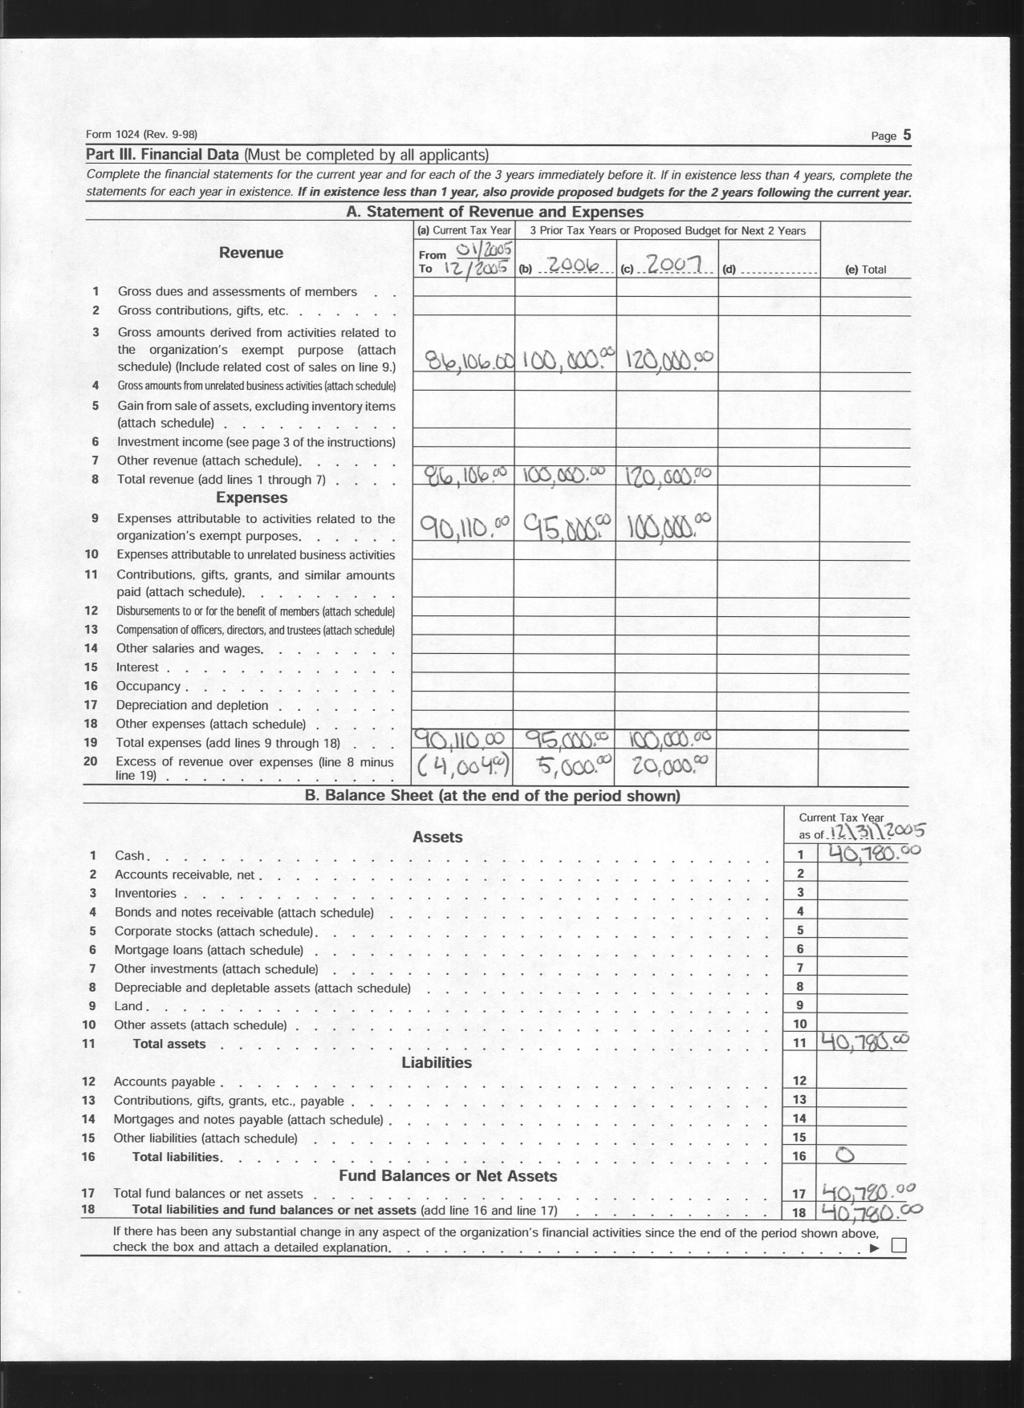 Form 1024 (Rev. 9-98) Part III. Financial Data (Must be completed by all applicants) Page 5 Complete the financial statements for the current year and for each of the 3 years immediately before it.